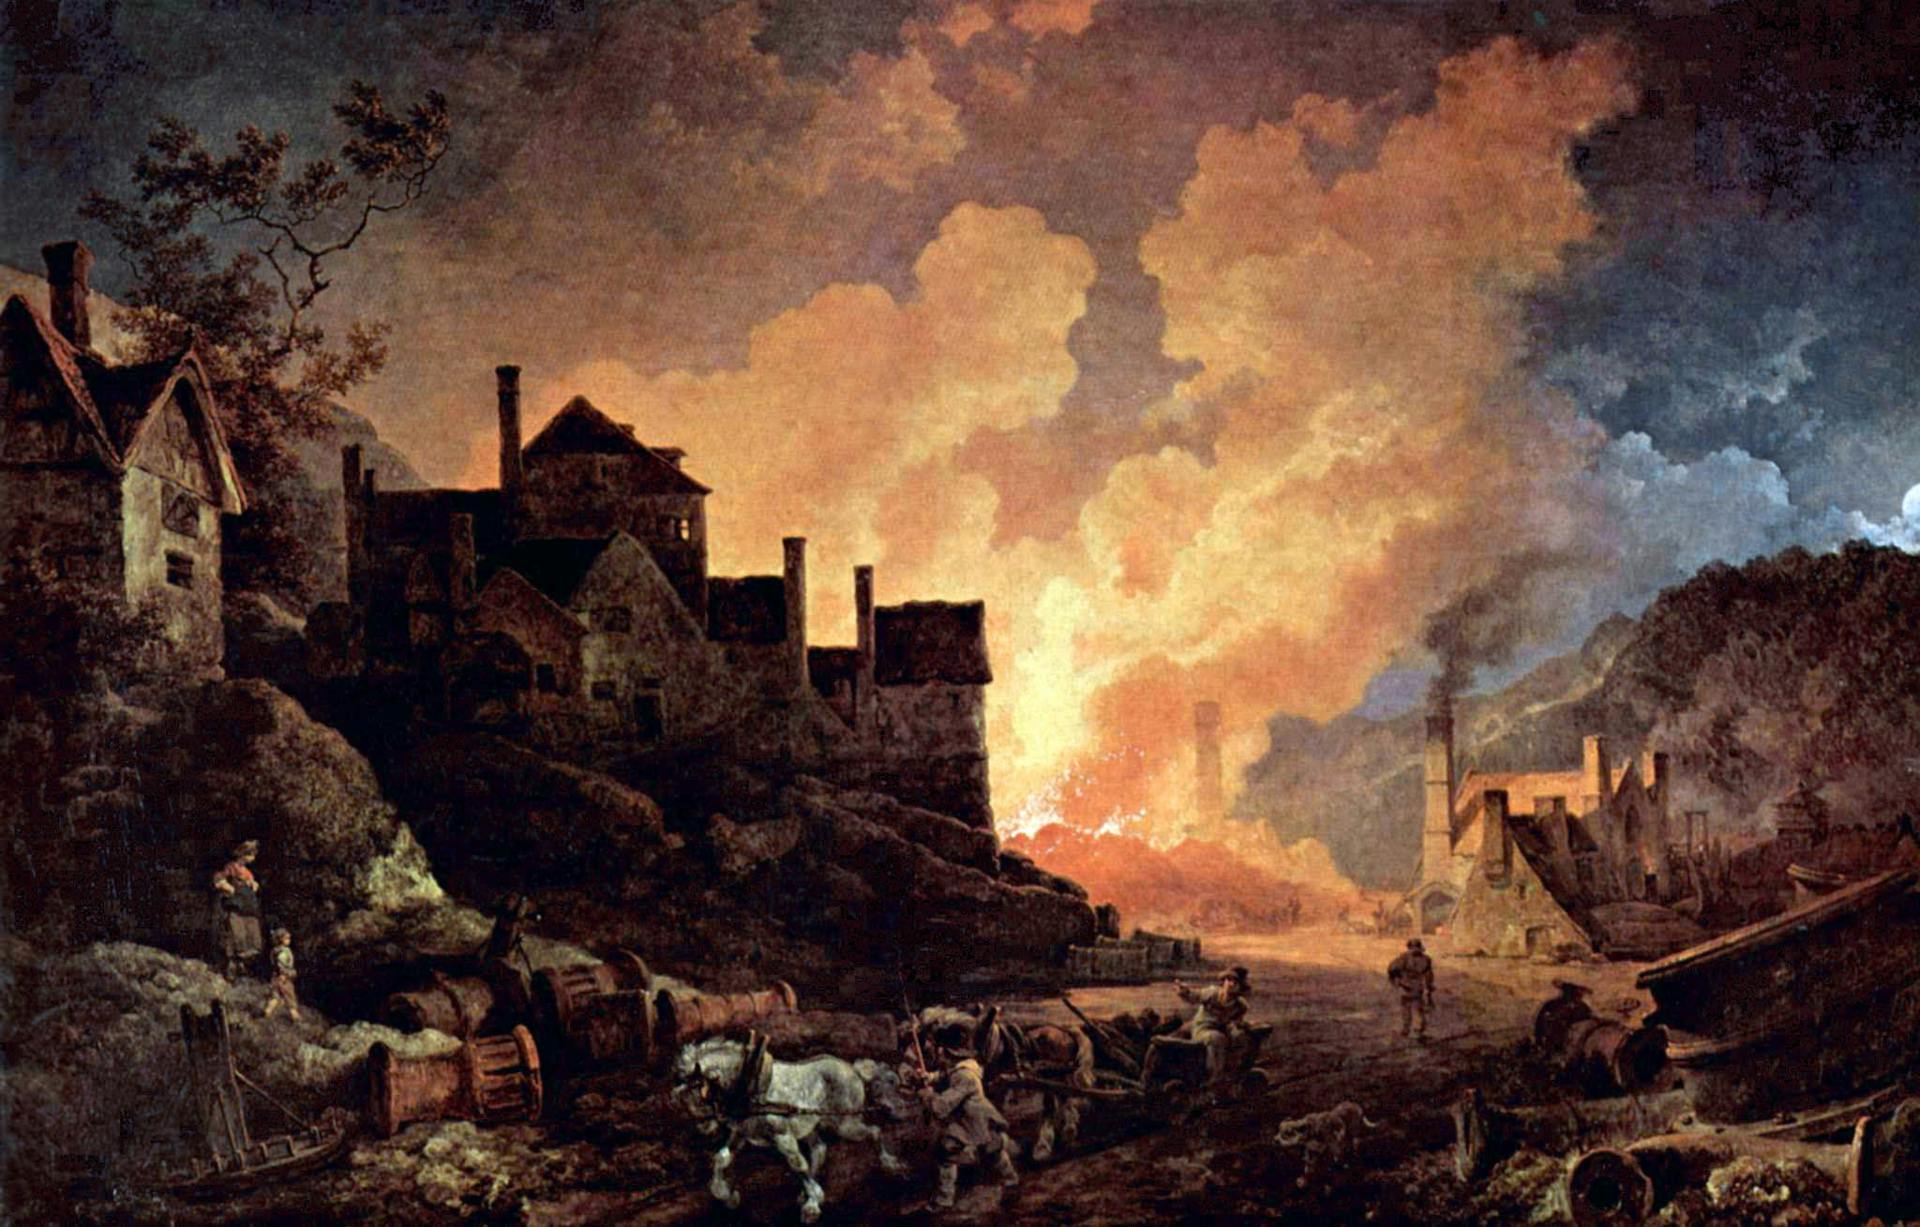 Coalbrookdale by Night, 1801, Philip James de Loutherbourg